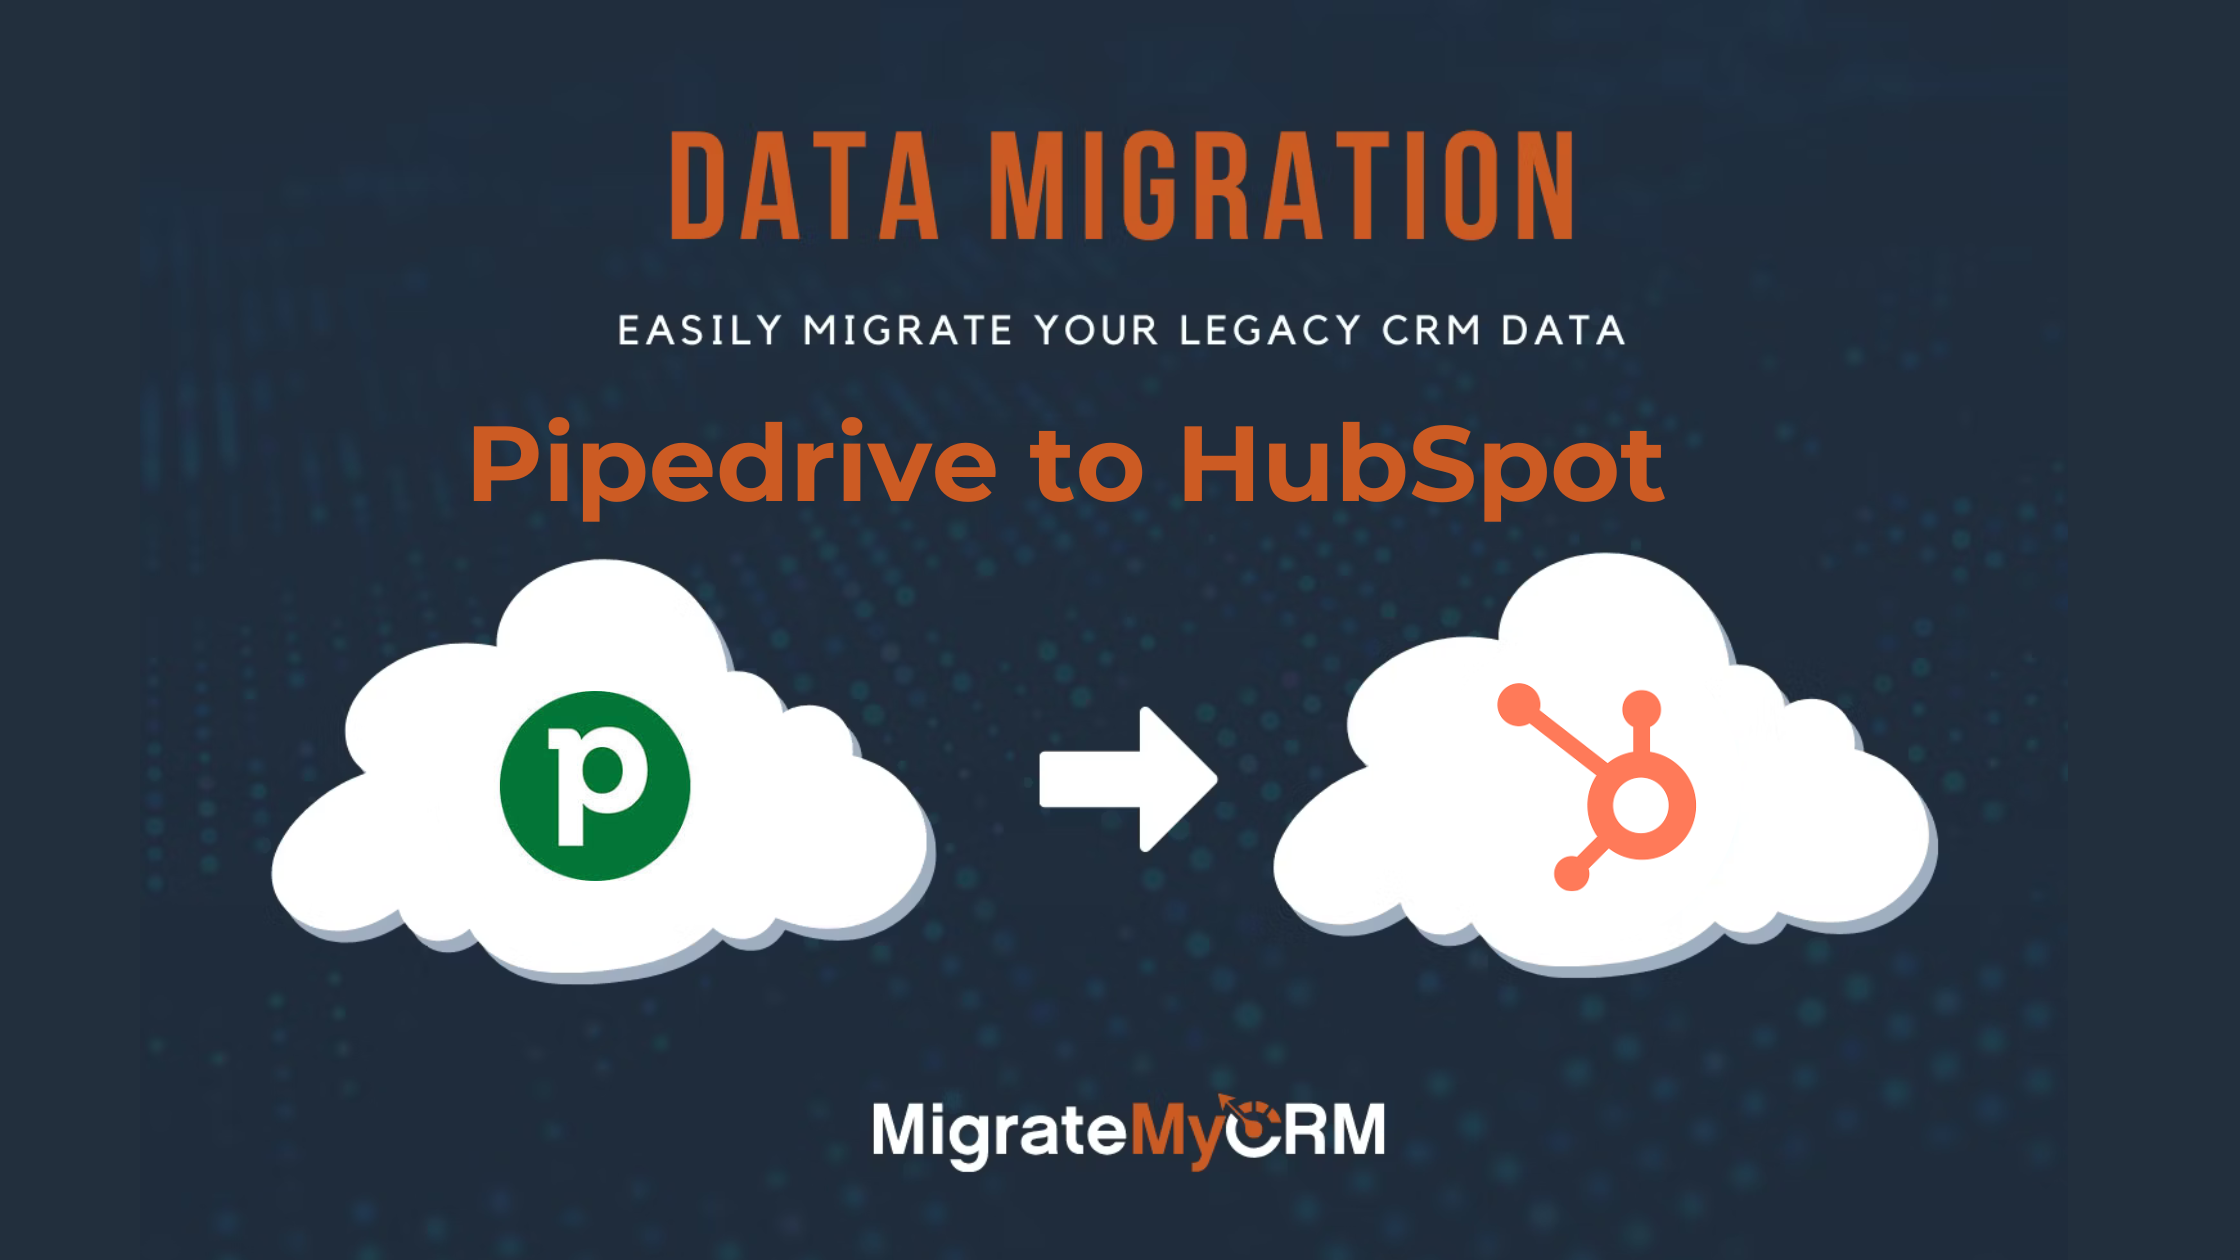 Pipedrive to HubSpot Migration [Guide]